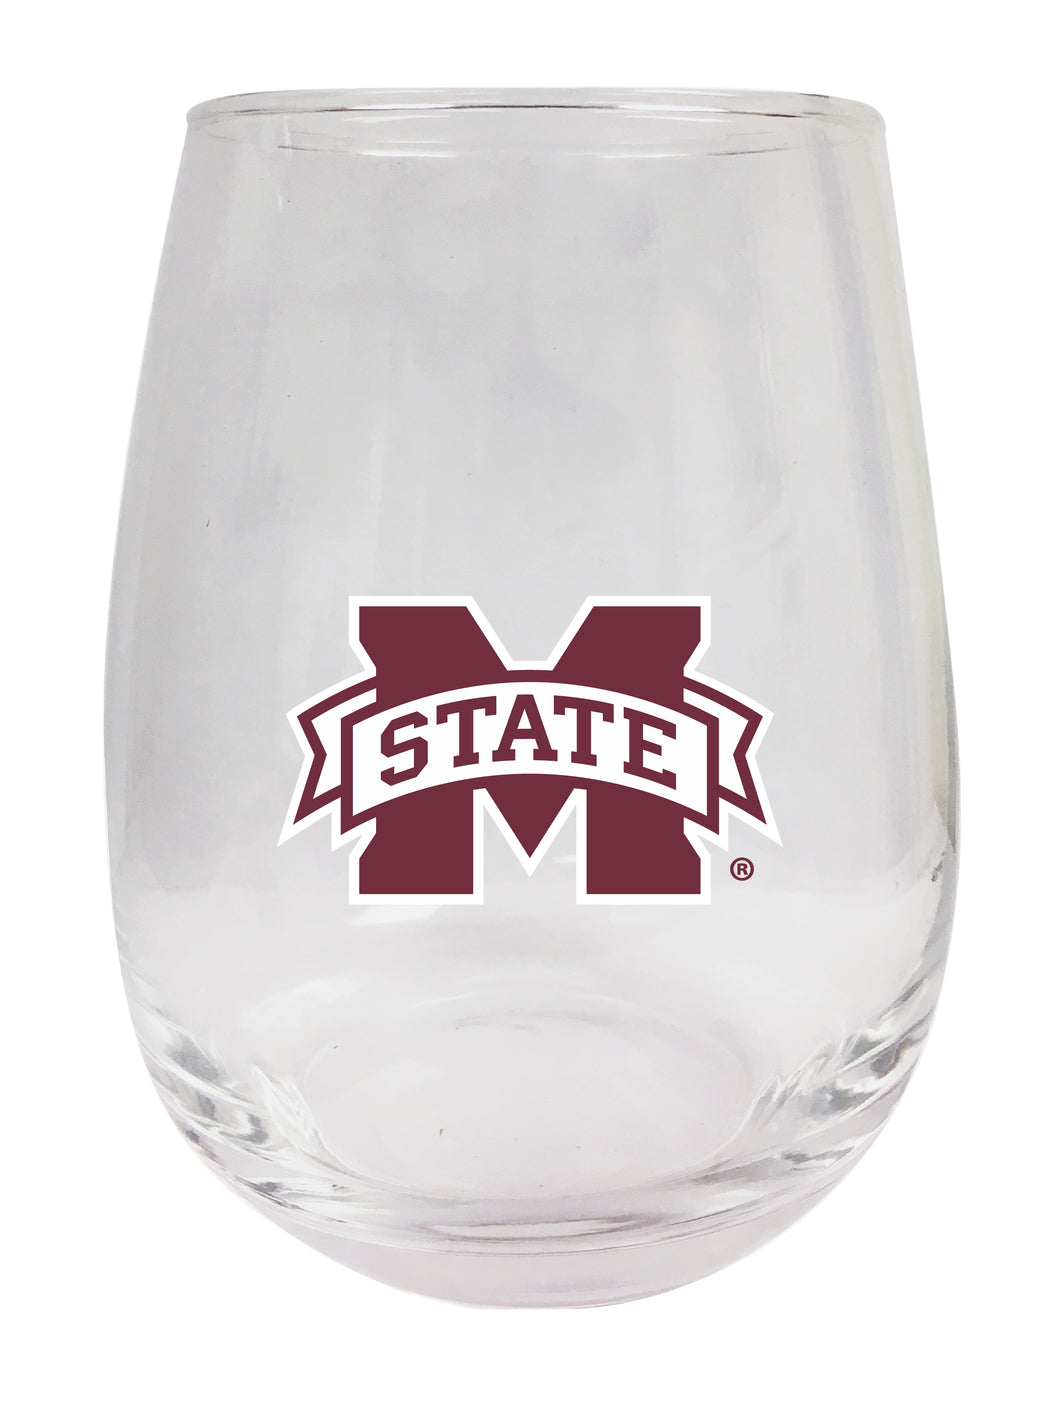 Mississippi State Bulldogs Stemless Wine Glass - 9 oz. | Officially Licensed NCAA Merchandise